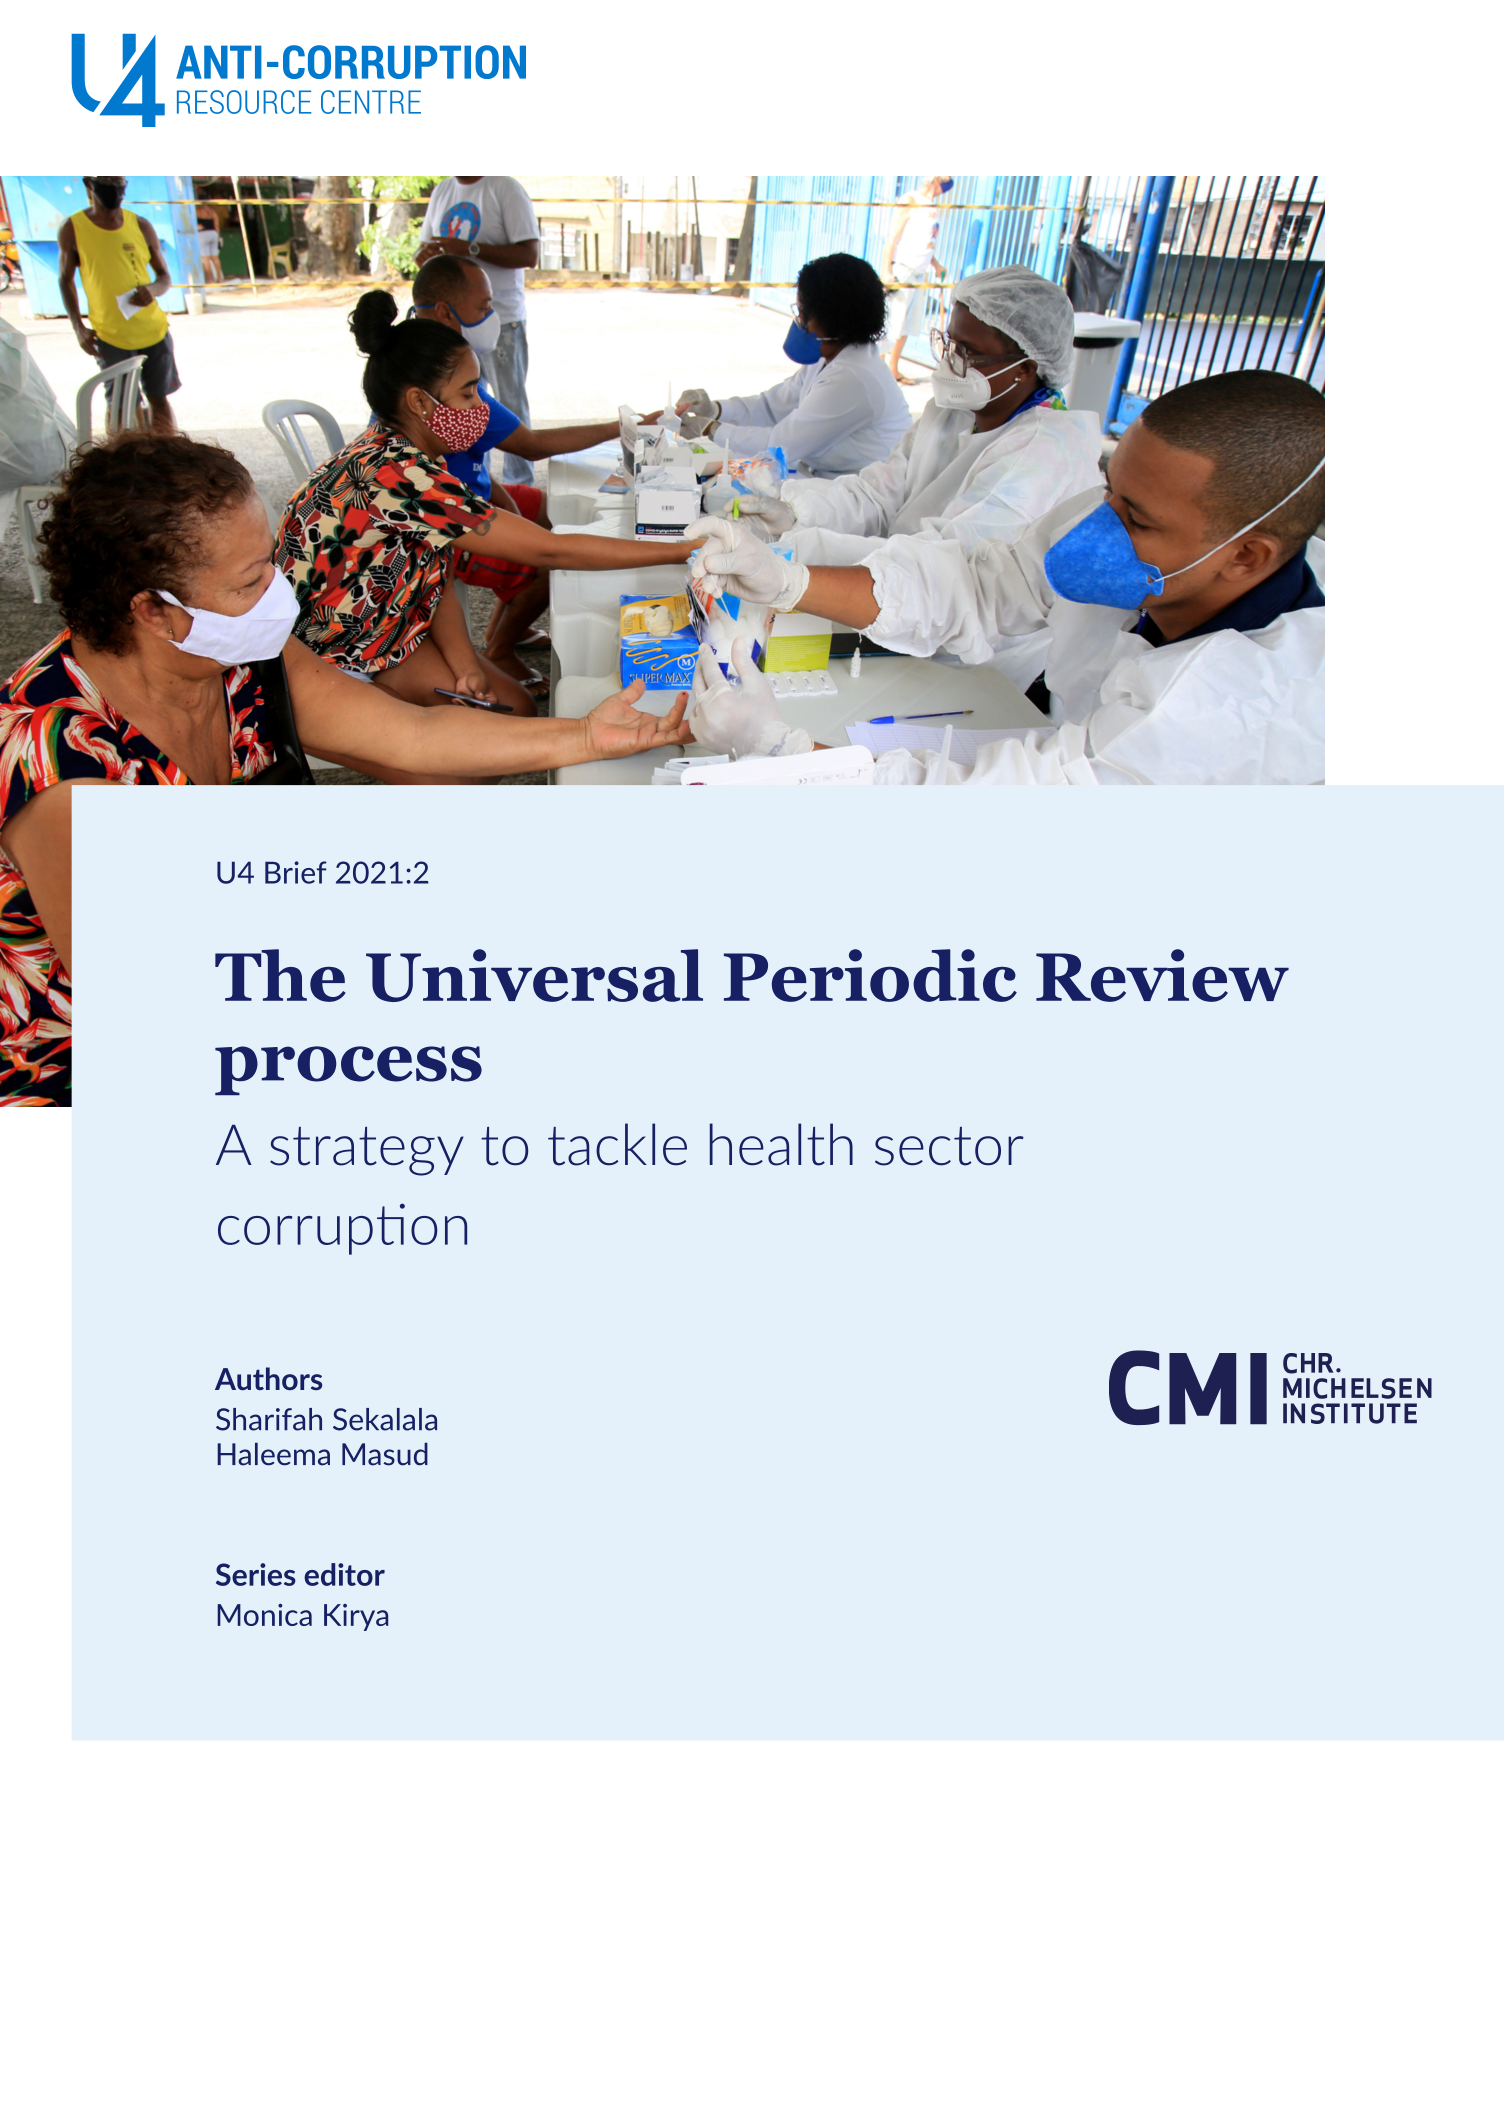 The Universal Periodic Review process